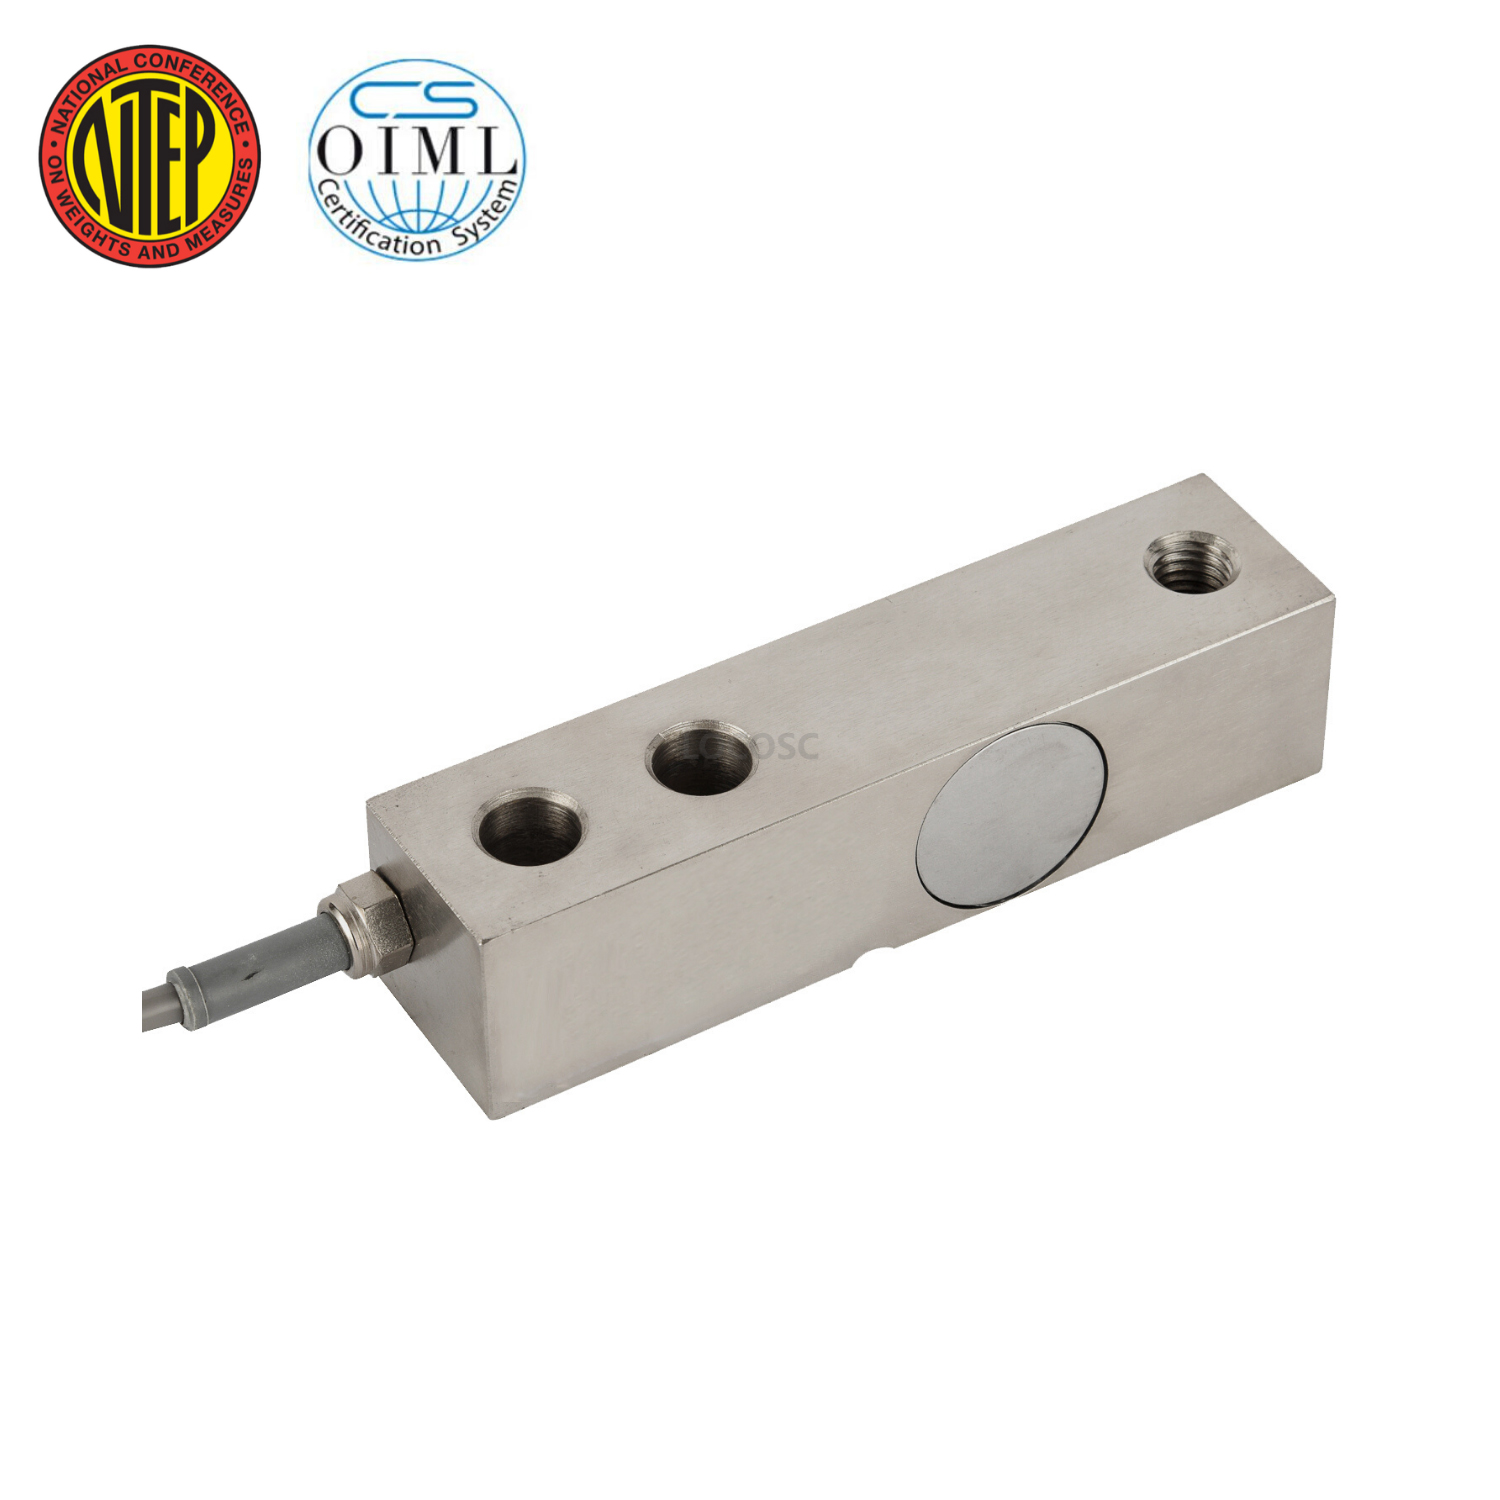 Lp7110h shear beam load cell